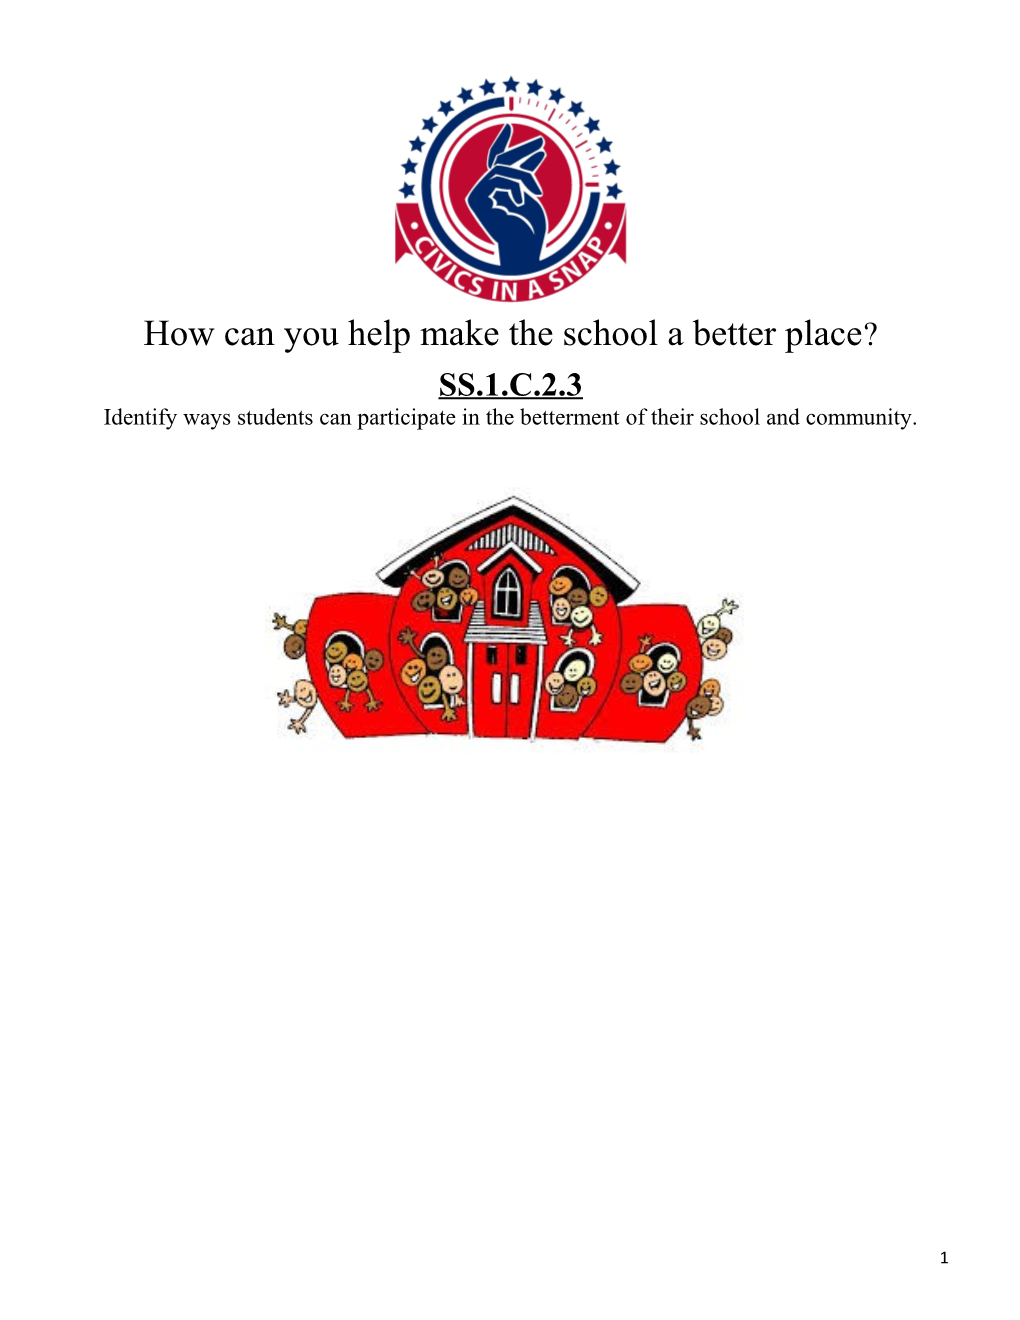 How Can You Help Make the School a Better Place?